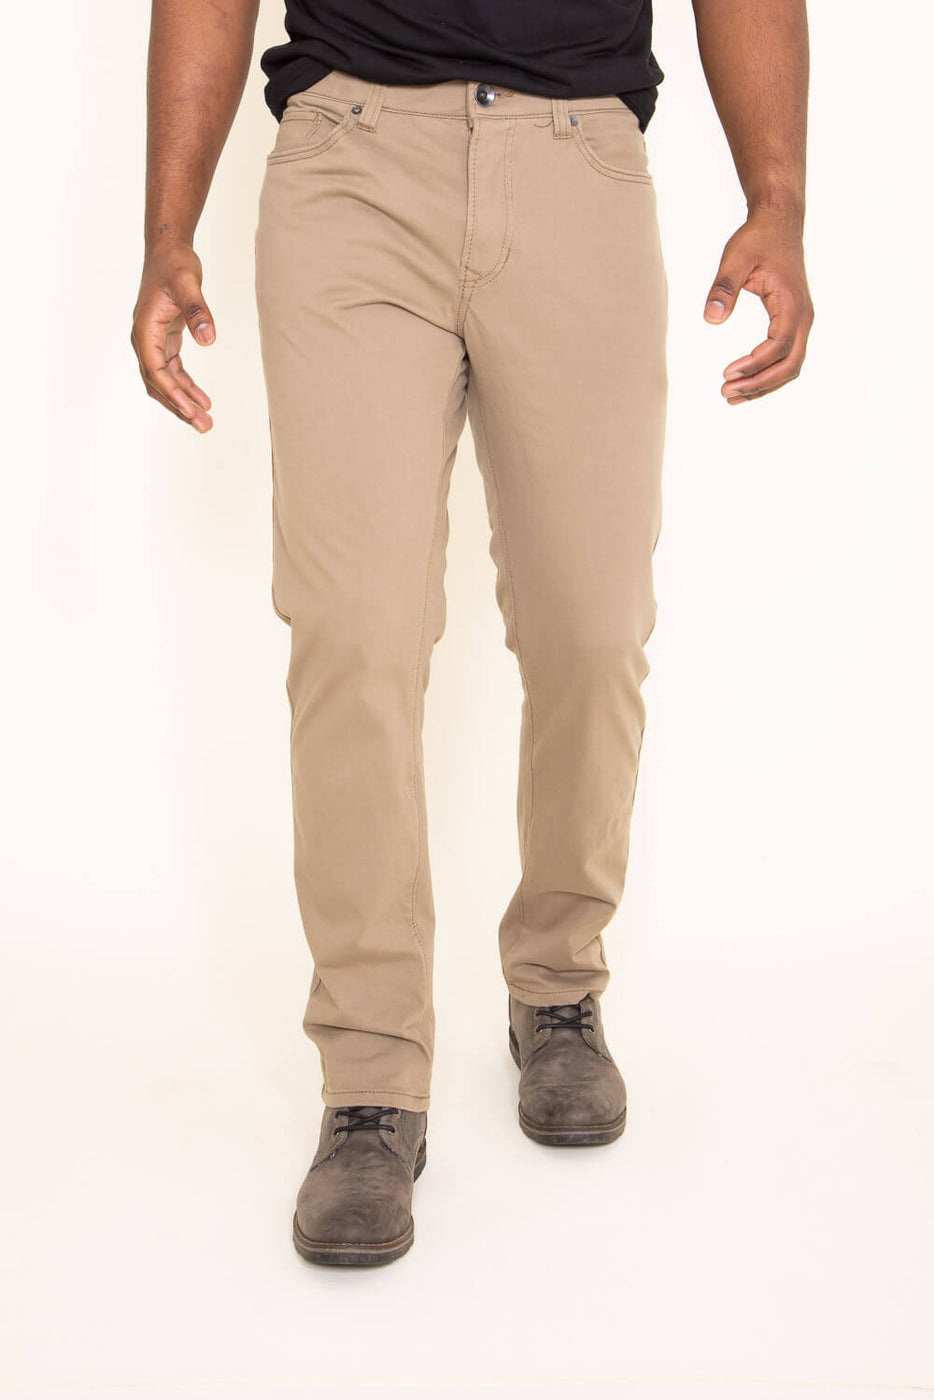 Union Five Pocket Comfort Twill Pants for Men in Brown | H3538WT 